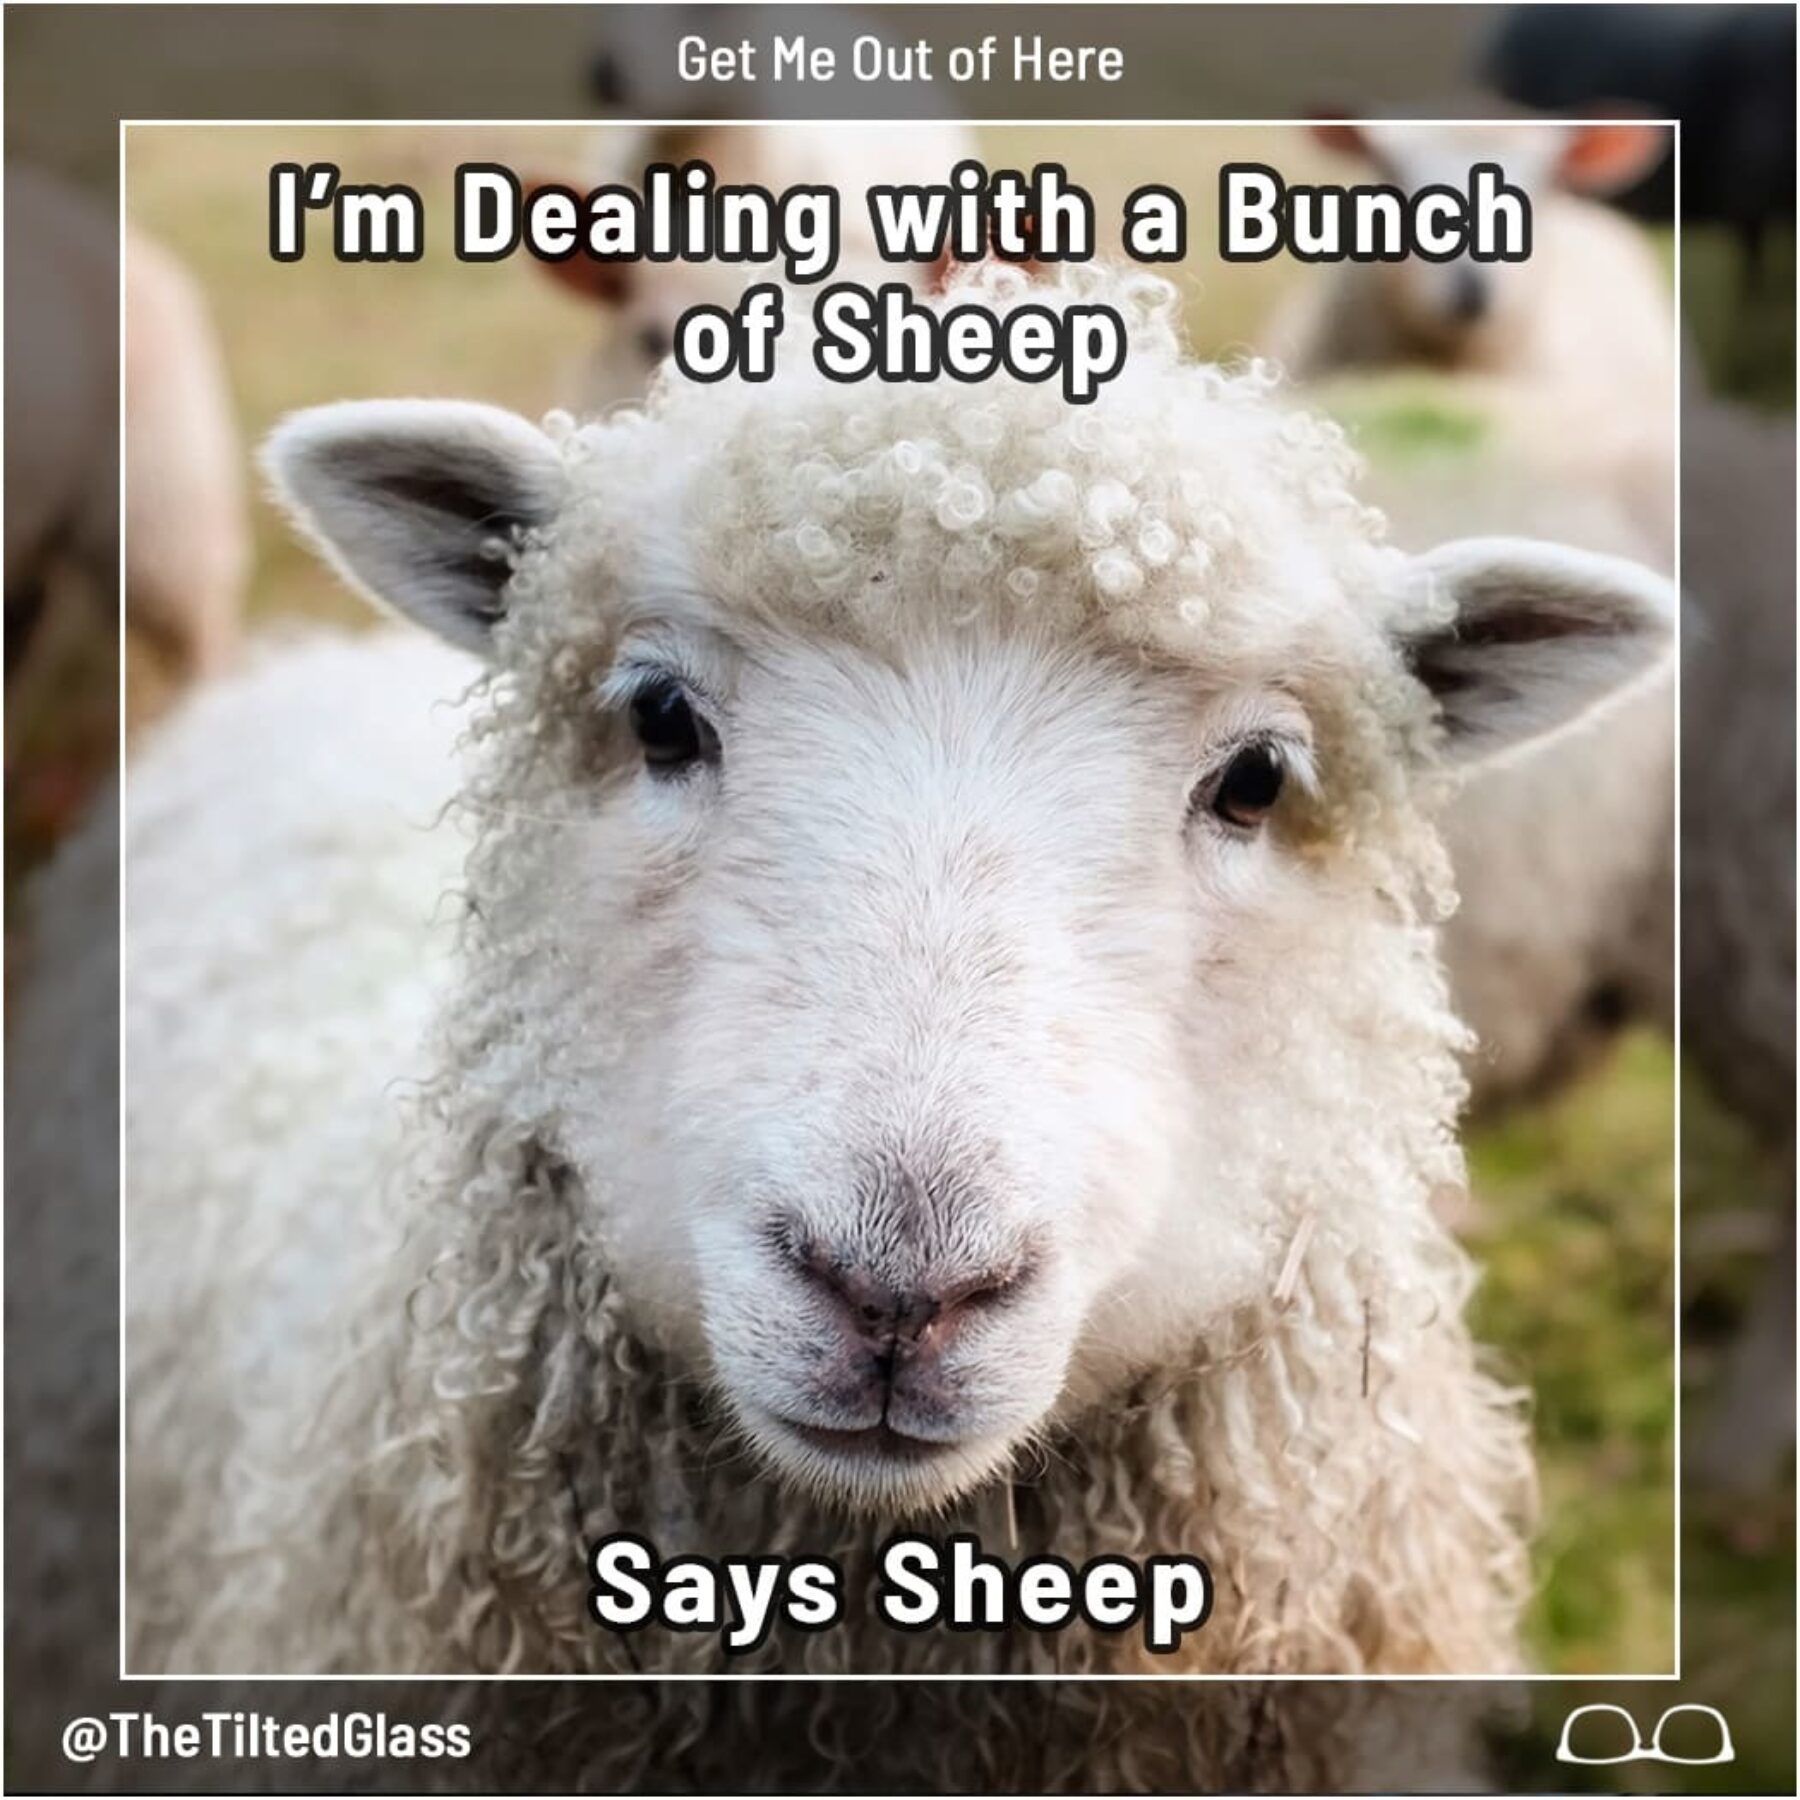 I’m Dealing with a Bunch of Sheep, Says Sheep